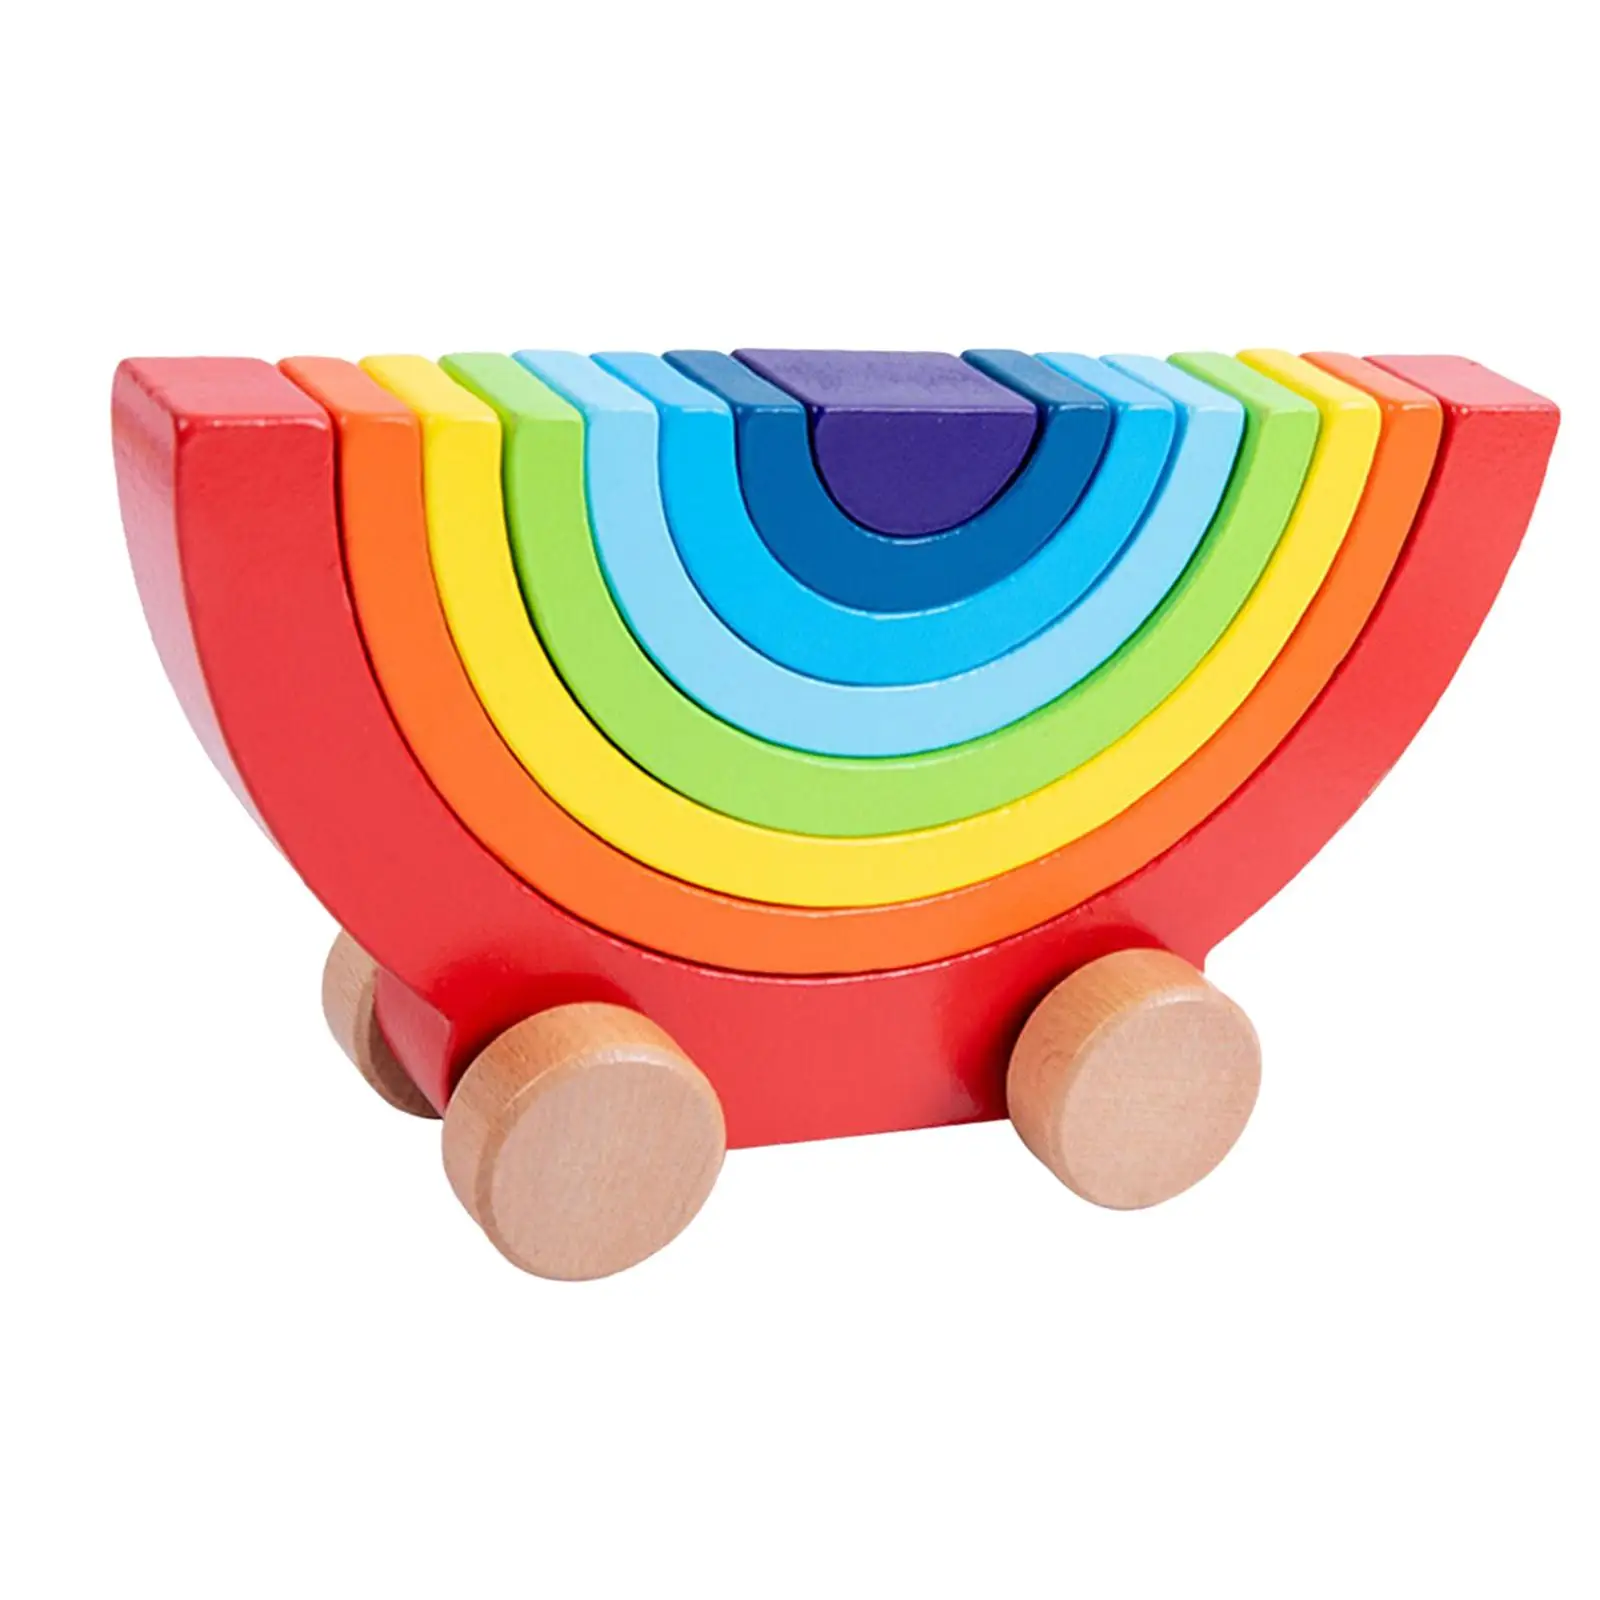 Wooden Building Blocks Car Toy Stacking Stacker Gift Decoration for Toddlers